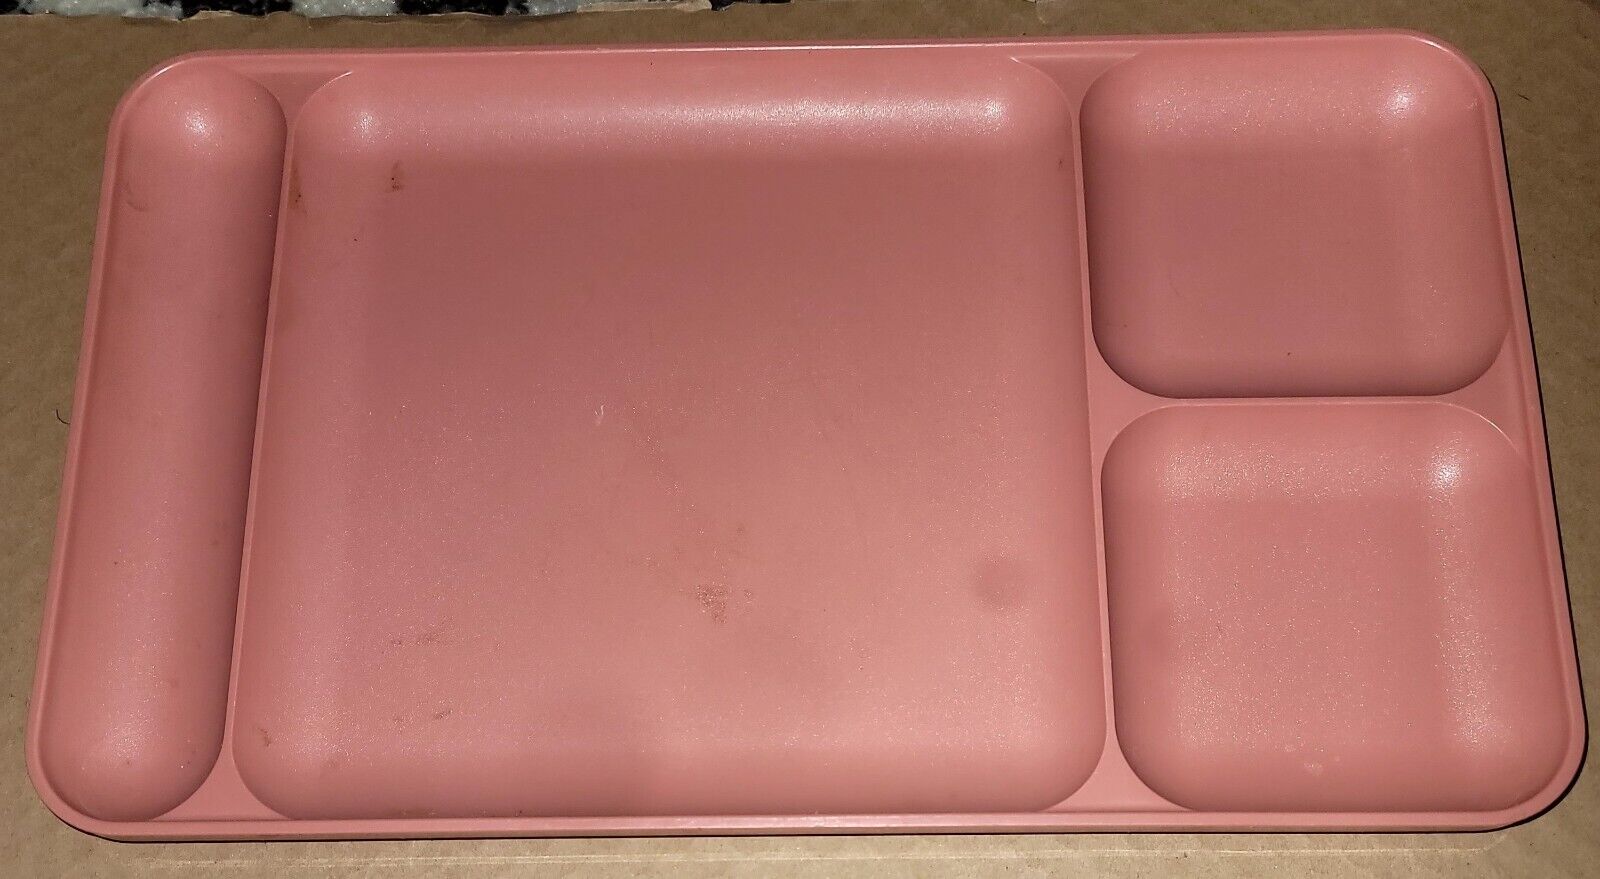 1 Vintage Pink Tupperware Food Cafeteria Style Divided Trays #1535-5